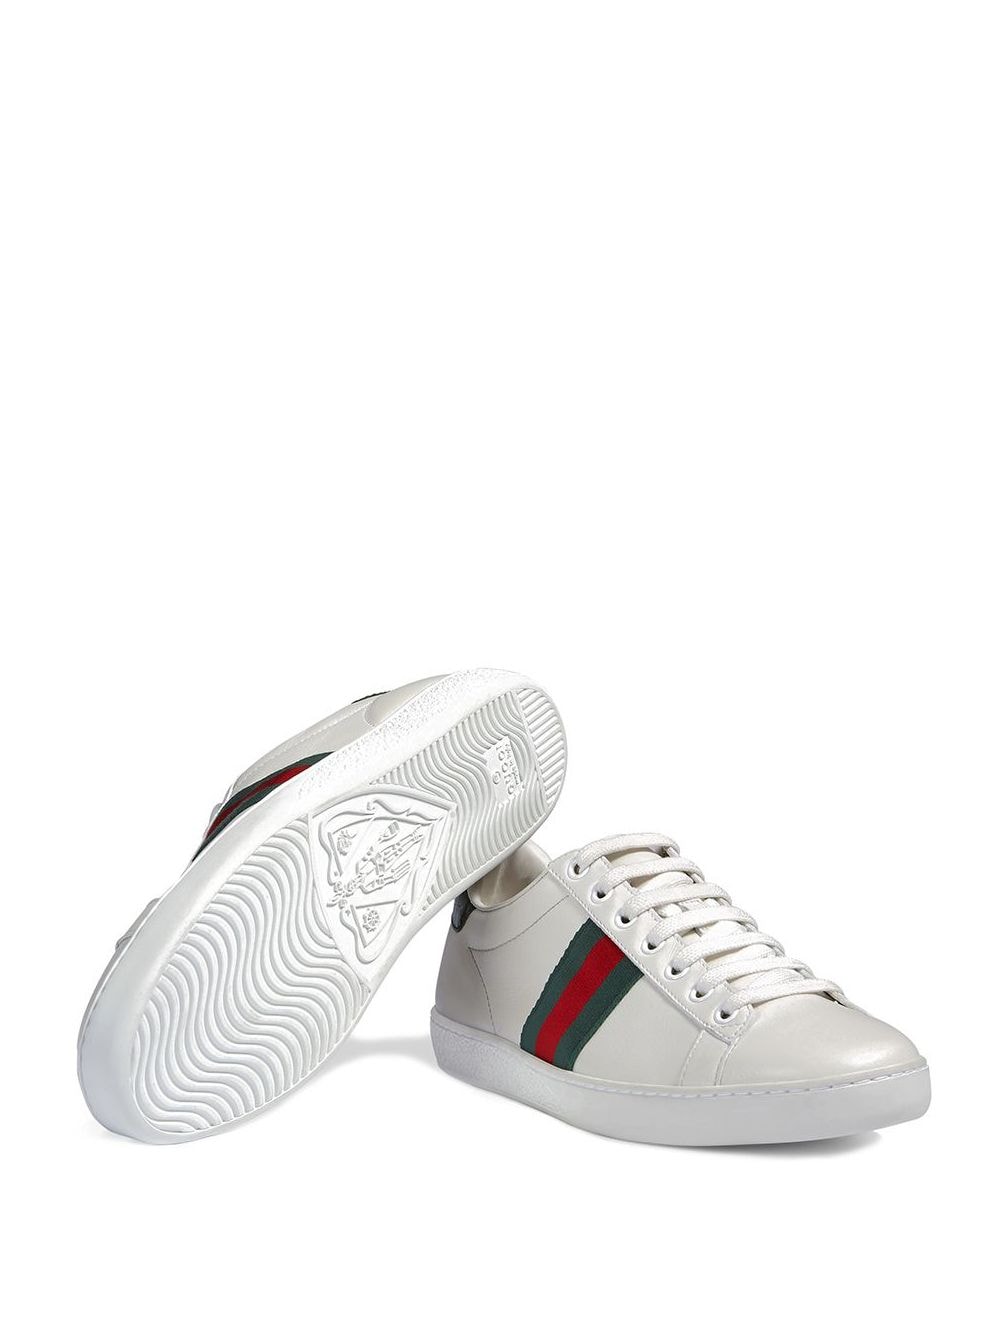 White Ace leather trainers, Gucci